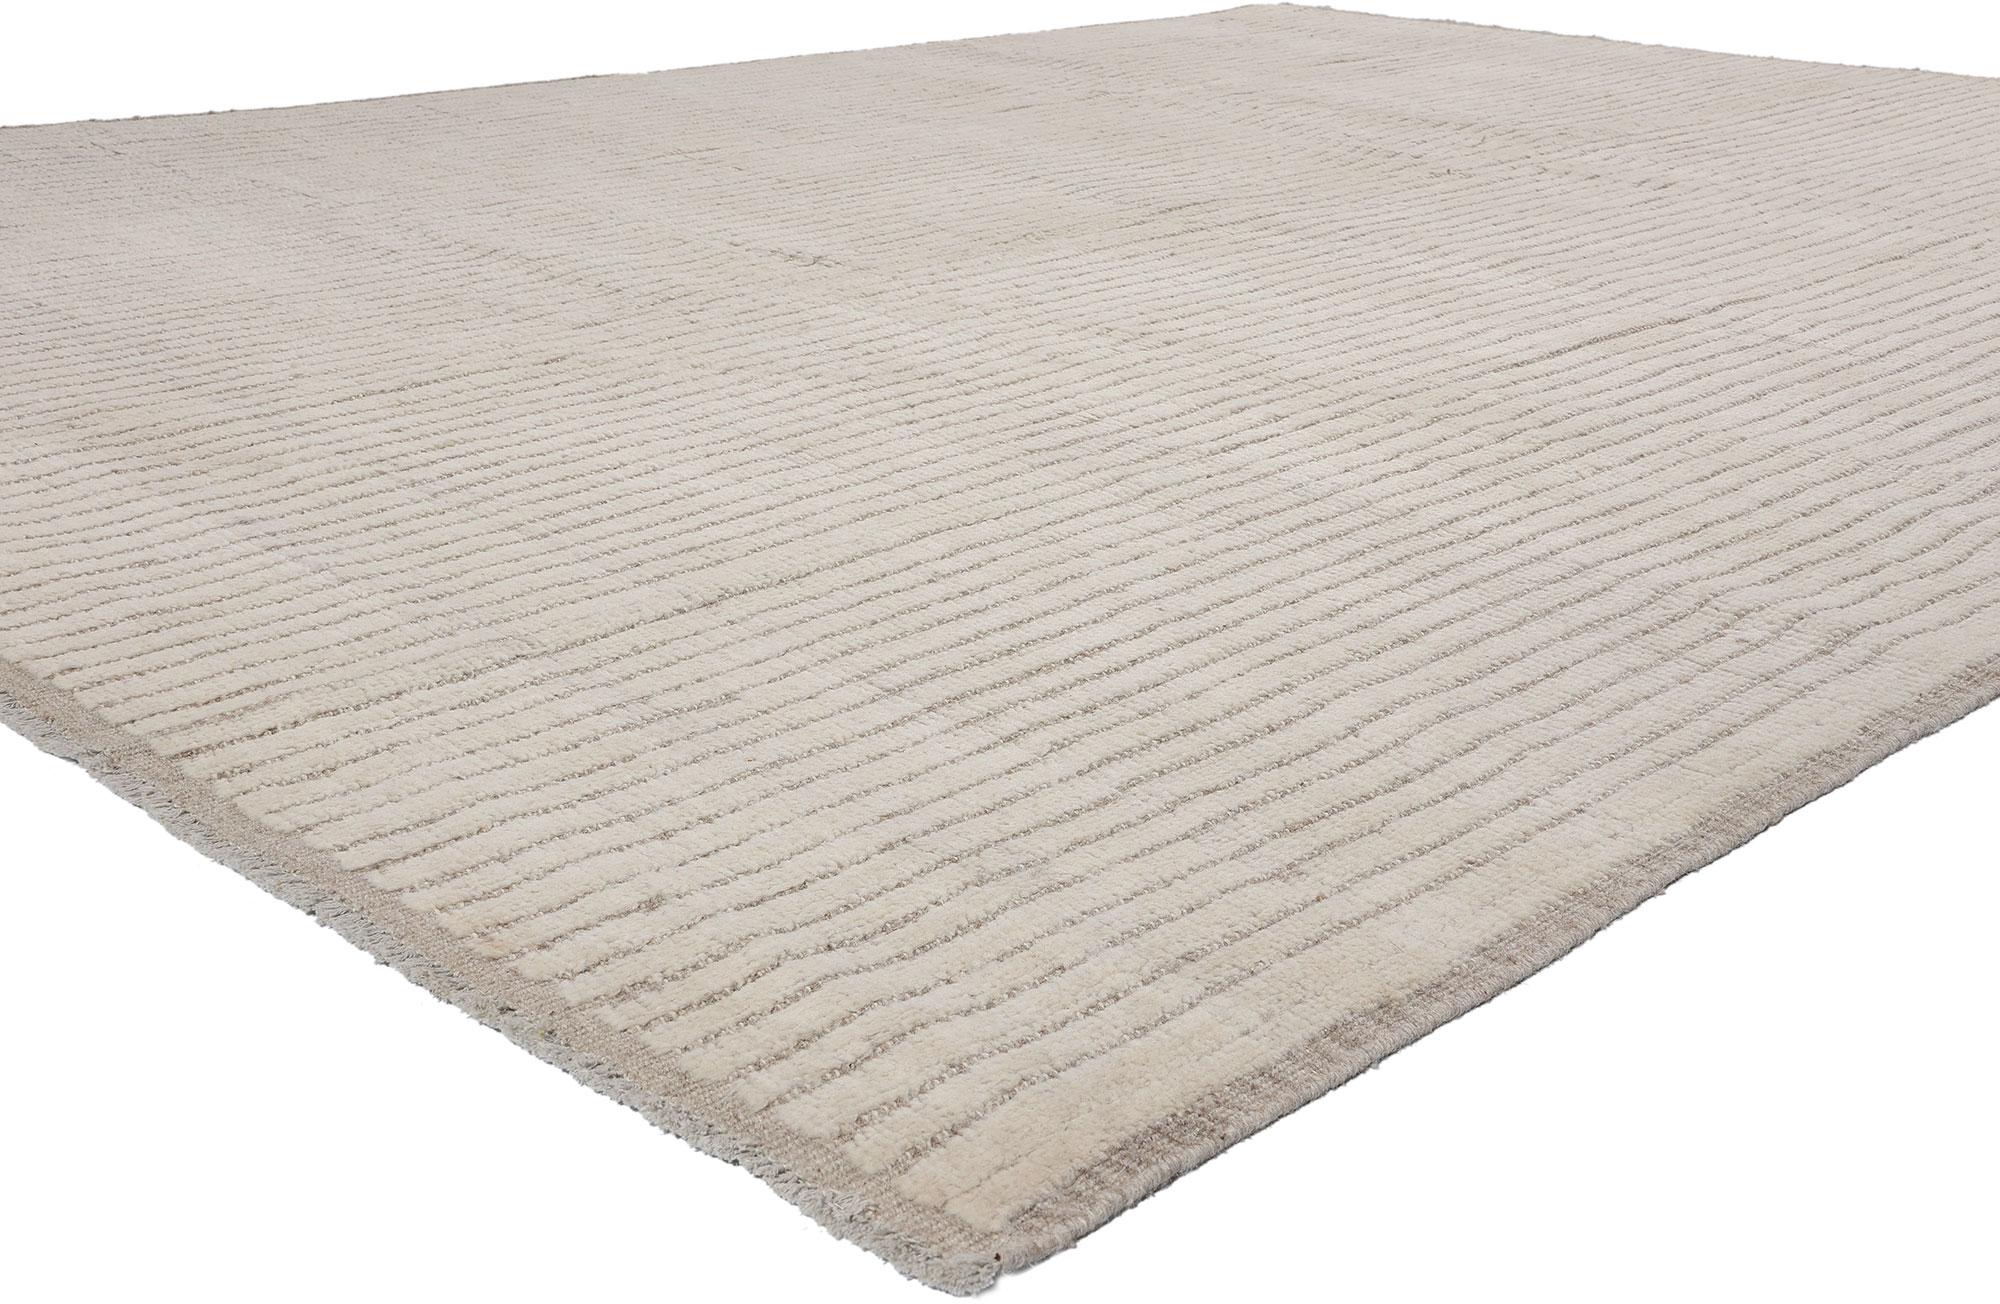 81072 Organic Modern Striations Moroccan Rug, 09'00 x 12'00. The robust character of Brutalism seamlessly intertwines with the serene simplicity of Japanese minimalism in this hand knotted wool Organic Modern Moroccan rug. Crafted with meticulous